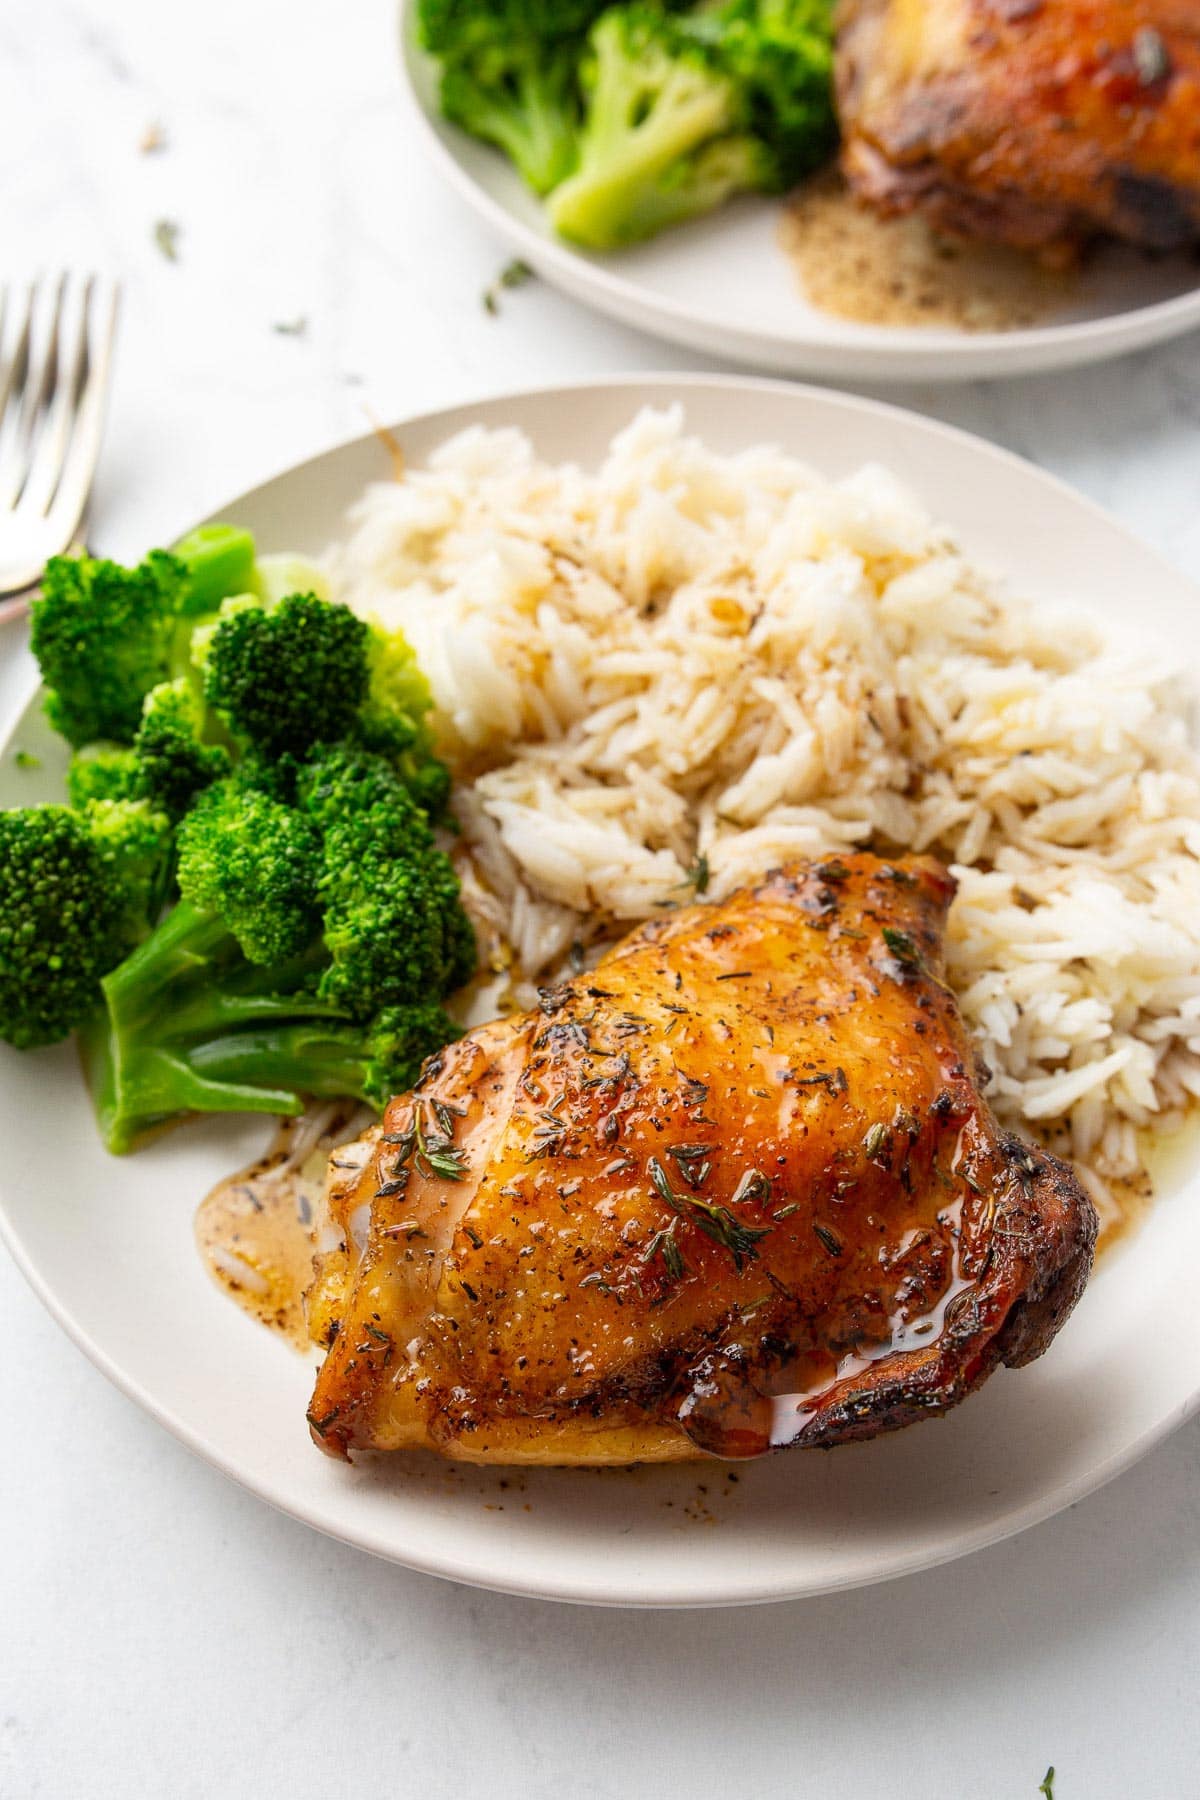 Baked honey balsamic chicken served with white rice and broccoli on two cream-colored plates.